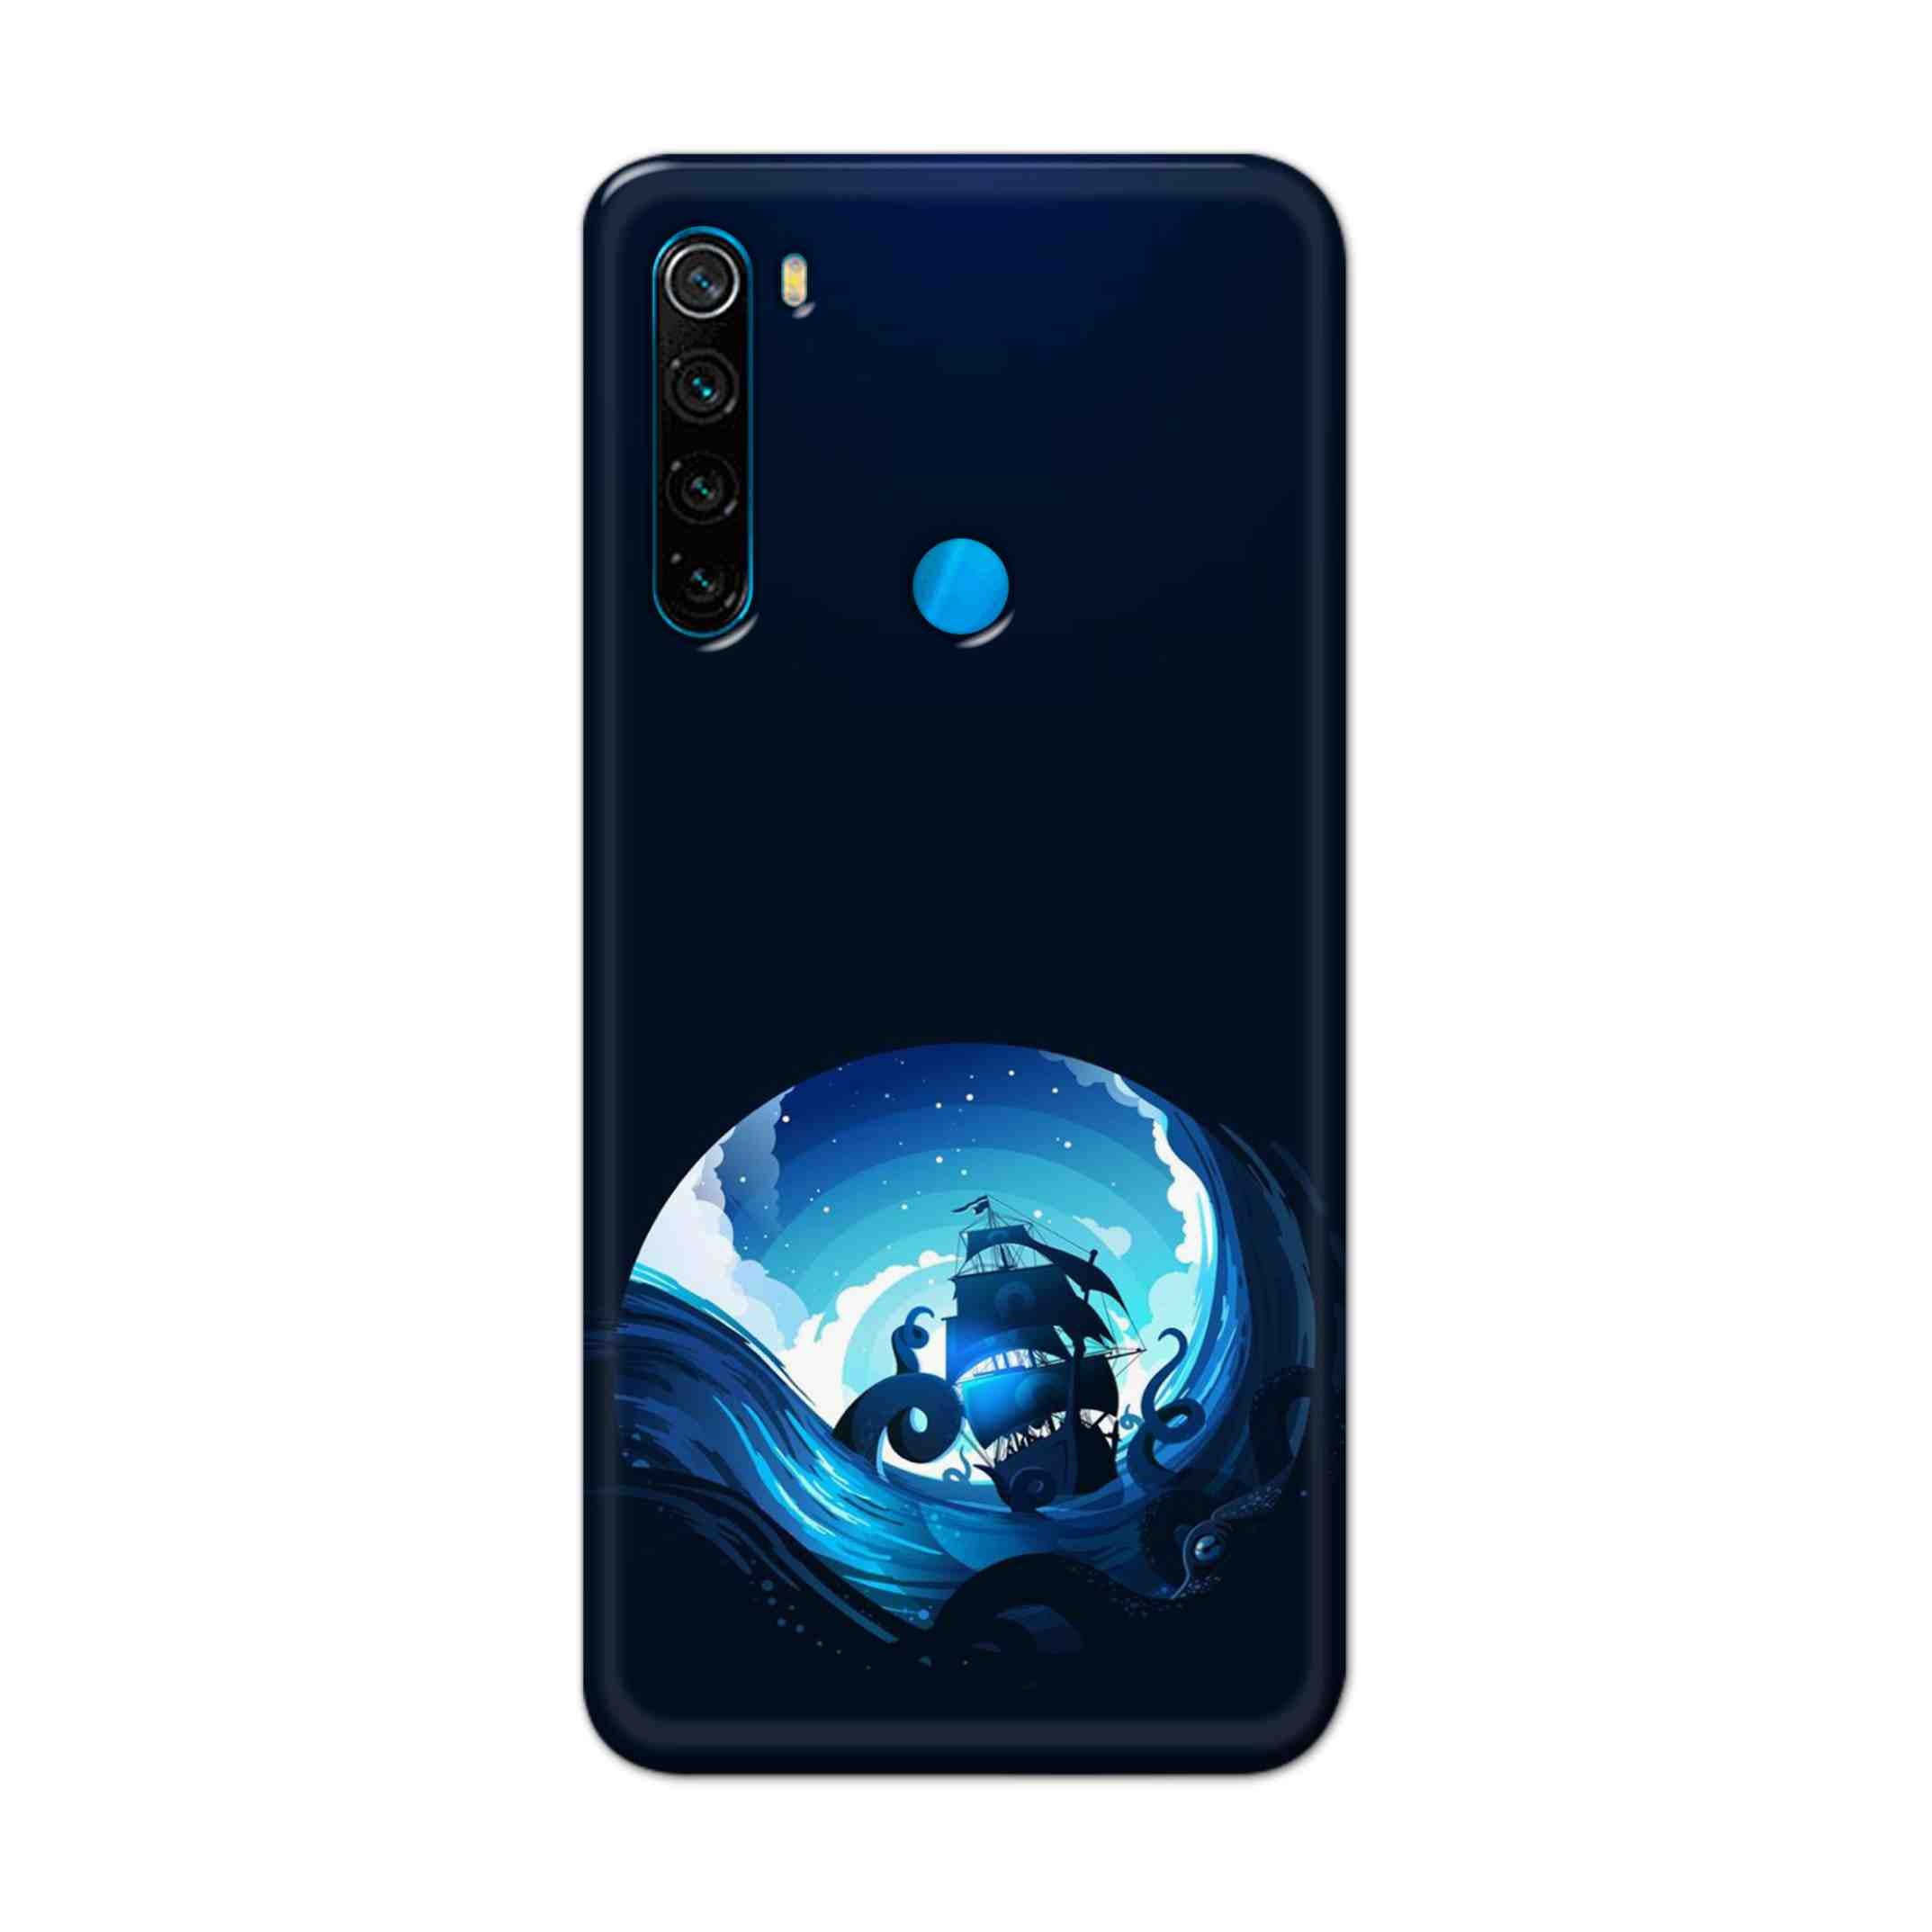 Buy Blue Sea Ship Hard Back Mobile Phone Case Cover For Xiaomi Redmi Note 8 Online